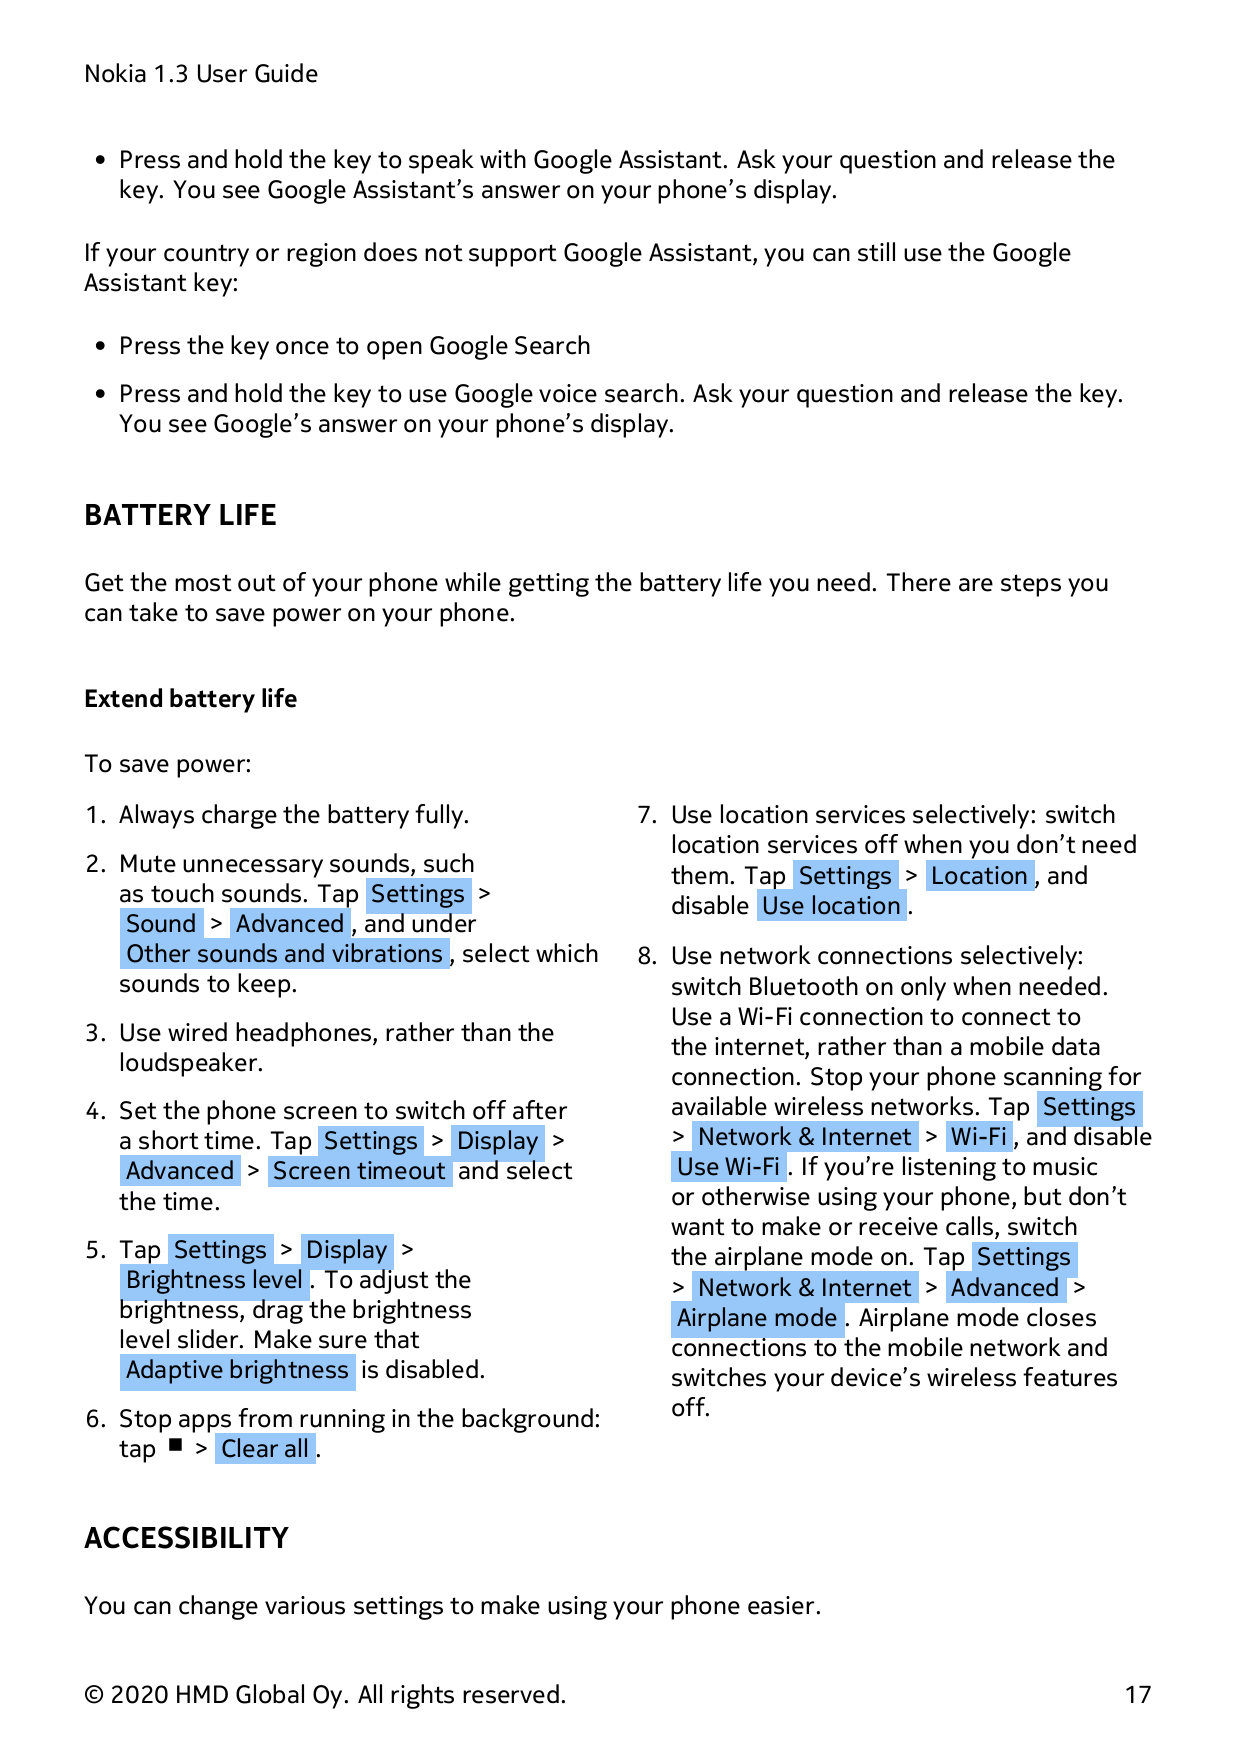 Nokia 1.3 User Guide• Press and hold the key to speak with Google Assistant. Ask your question and release thekey. You see Googl